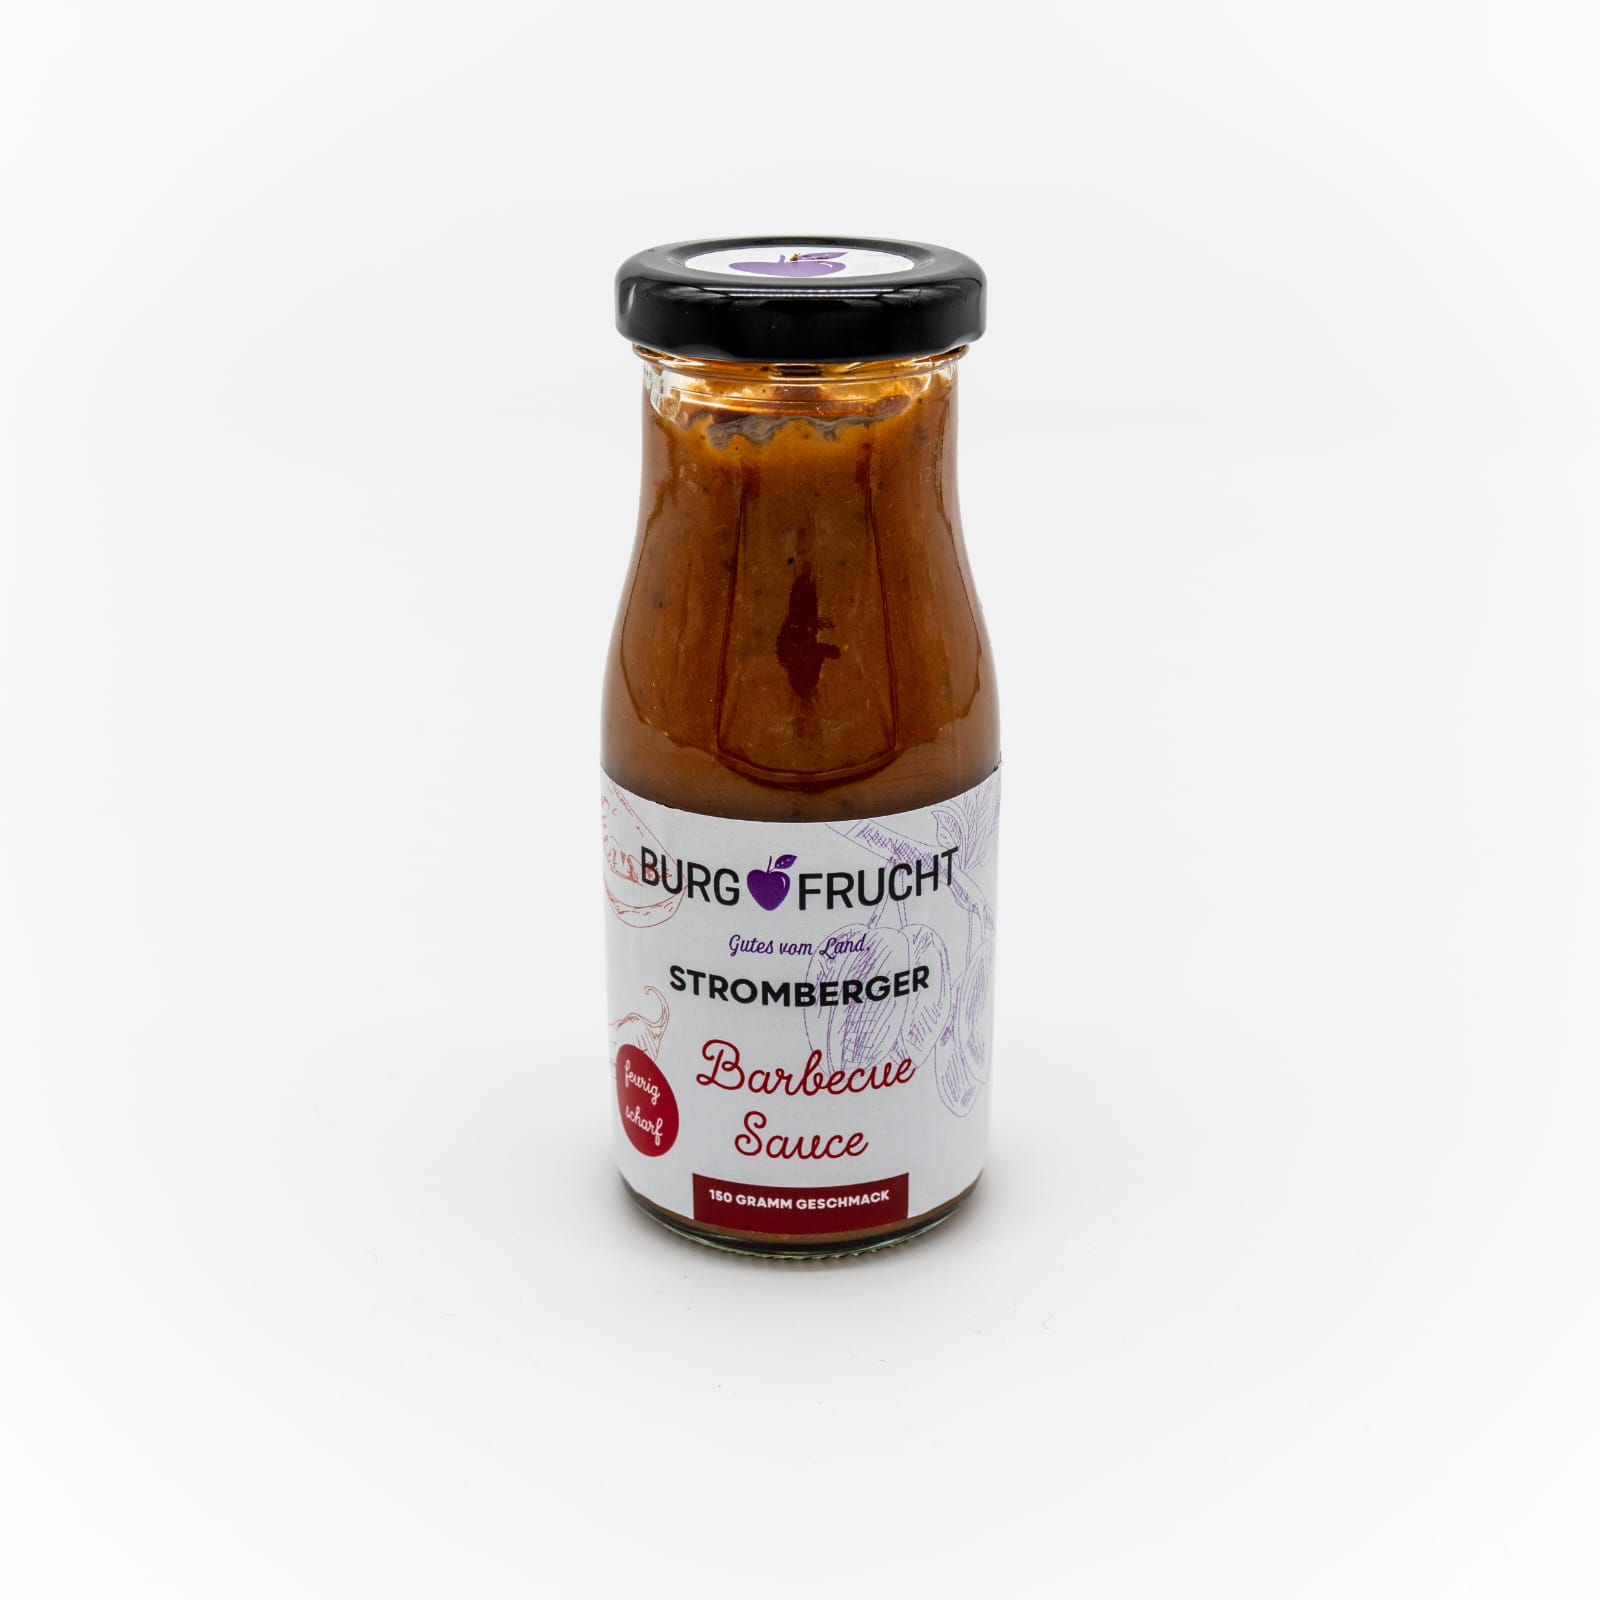 Stromberger Barbecue Sauce feurig-scharf